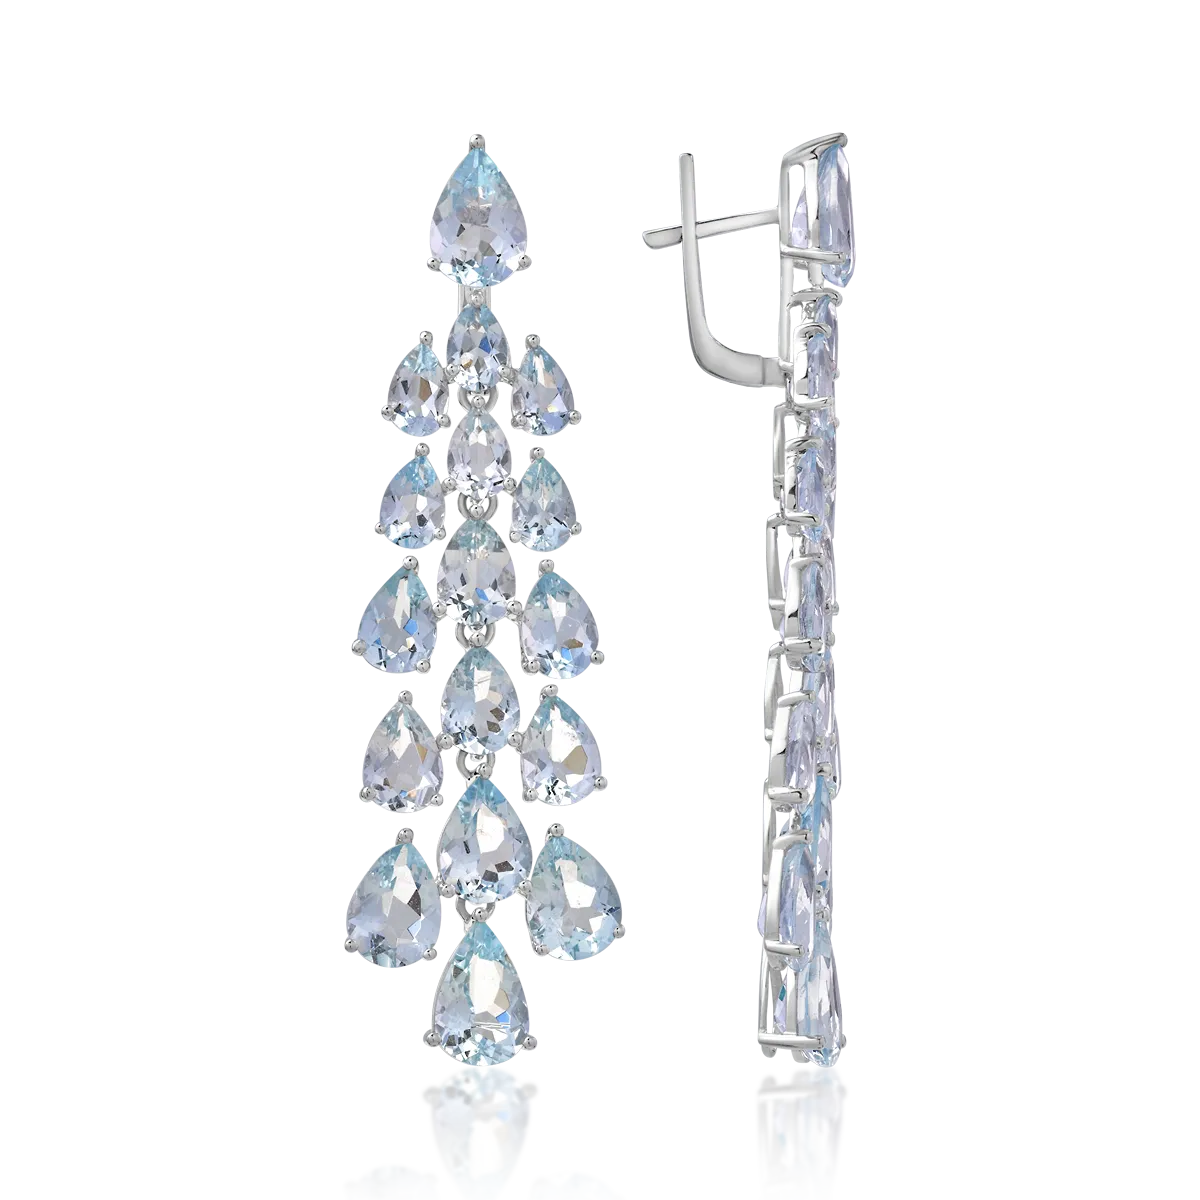 14K white gold earrings with 22.32ct aquamarines